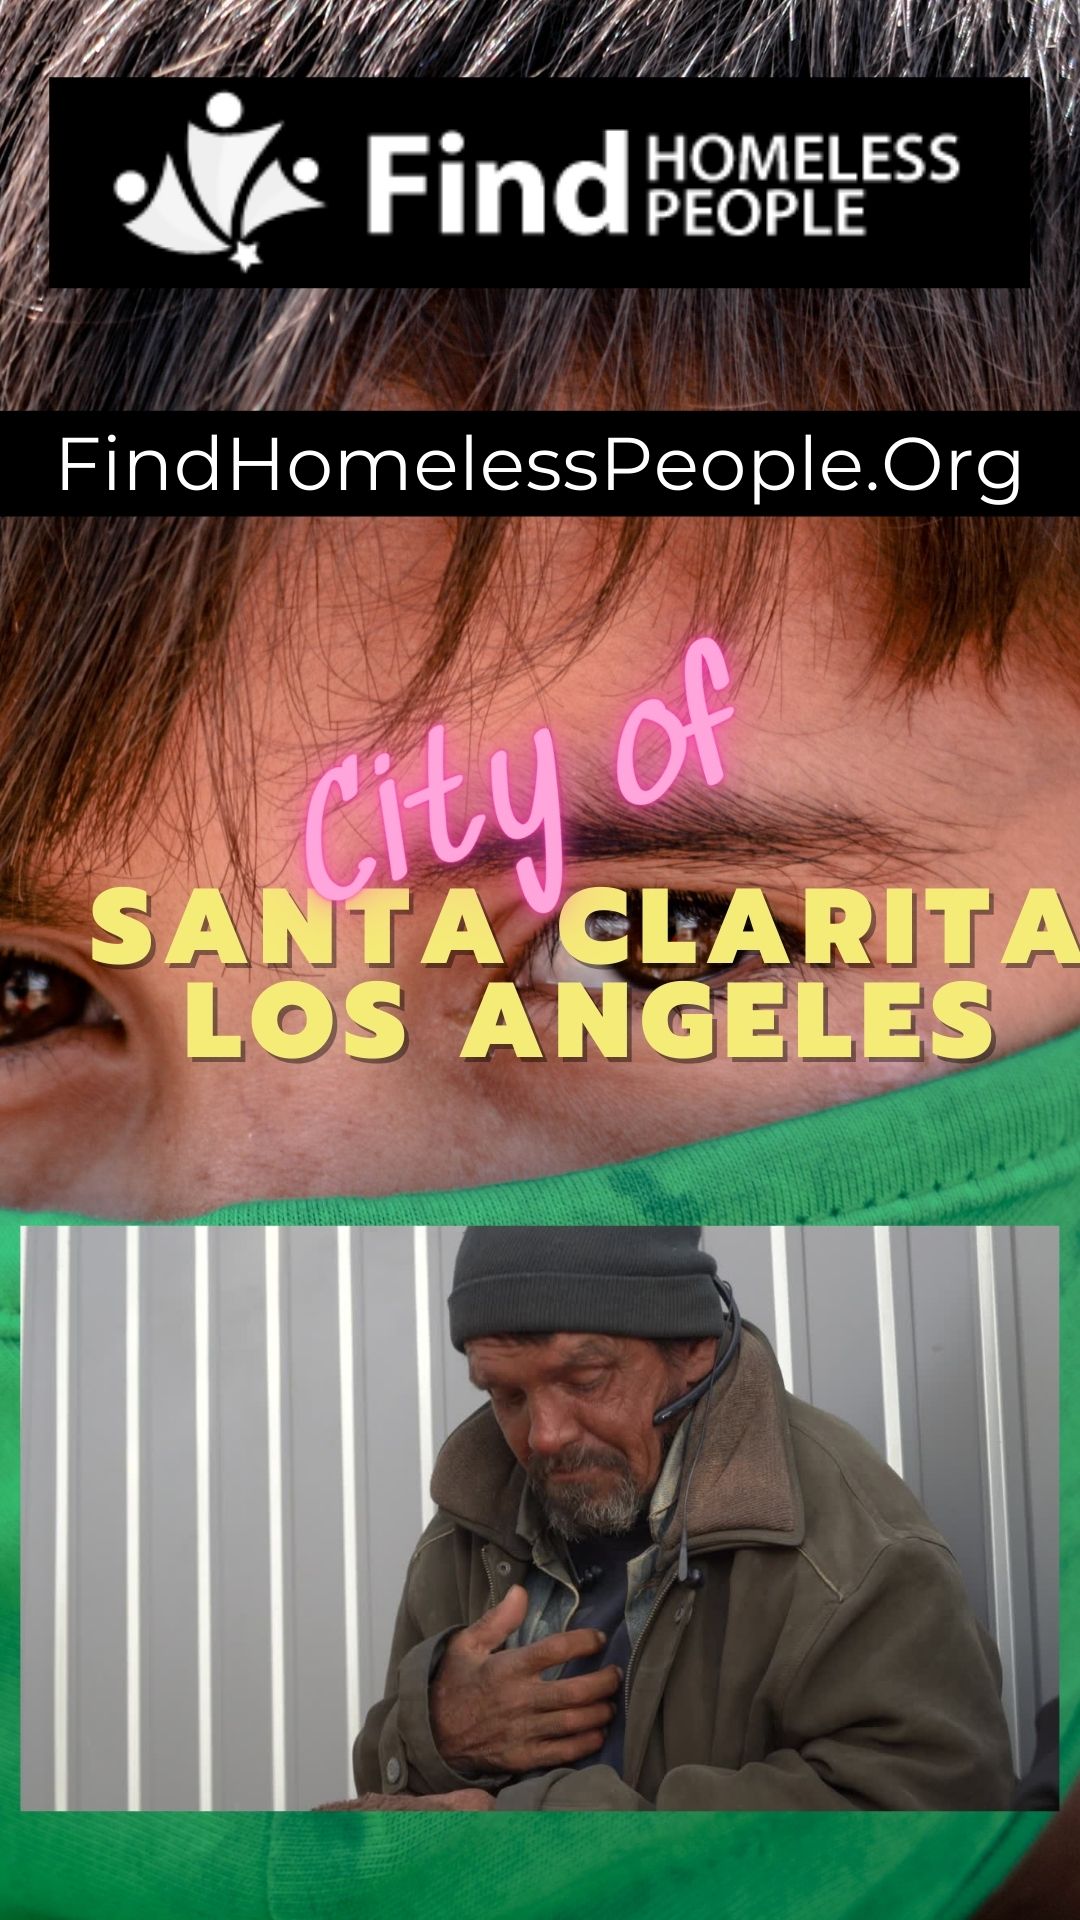 Arcadia Homeless Search